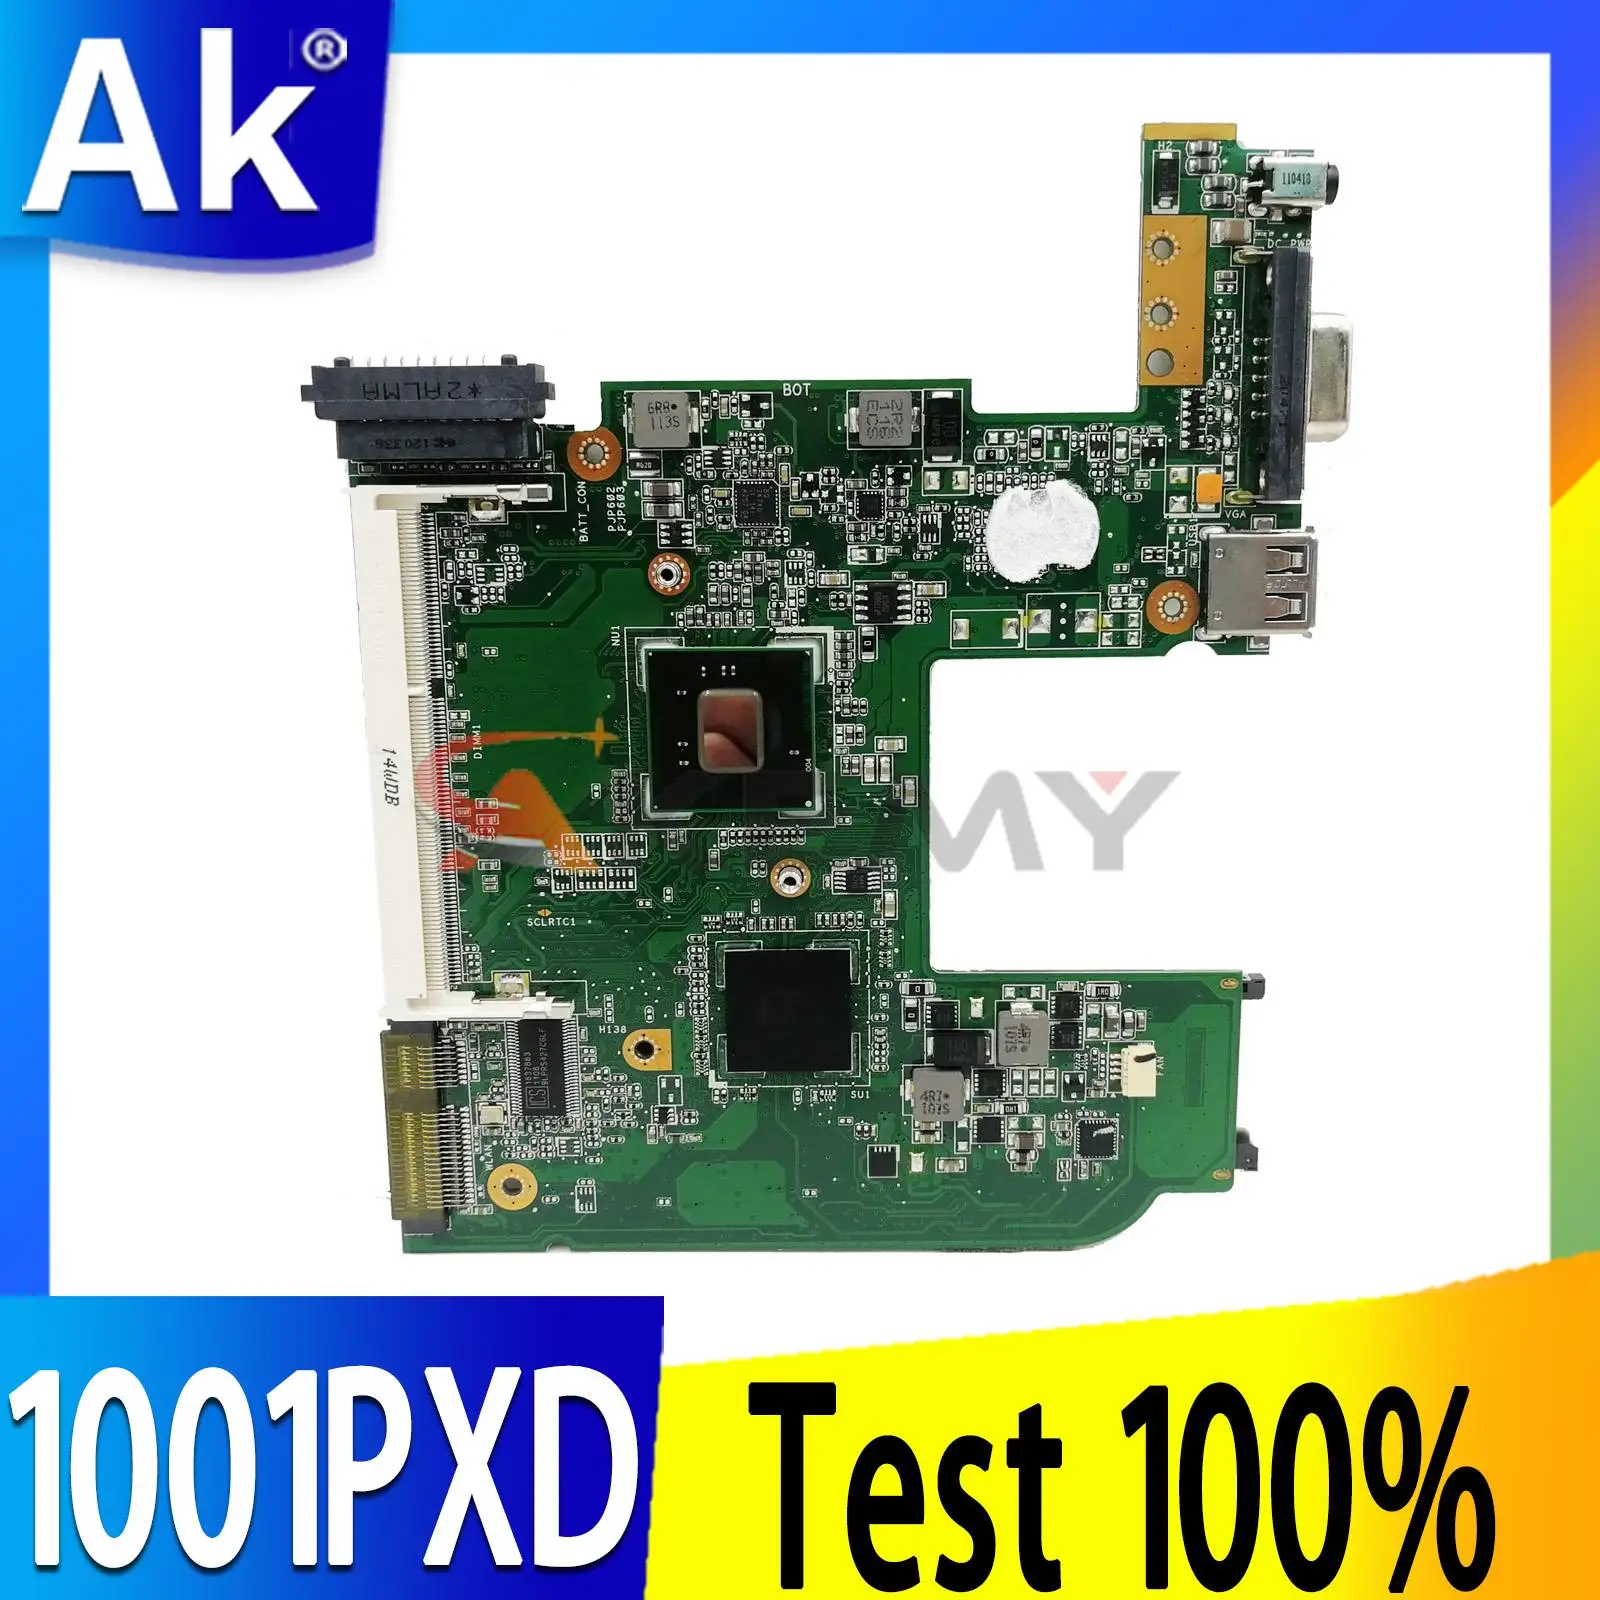 

1001PXD With Fan Heatsink Mainboard REV 1.1 For ASUS Eee PC 1001PXD Laptop Motherboard Working Fully Free Shipping Used